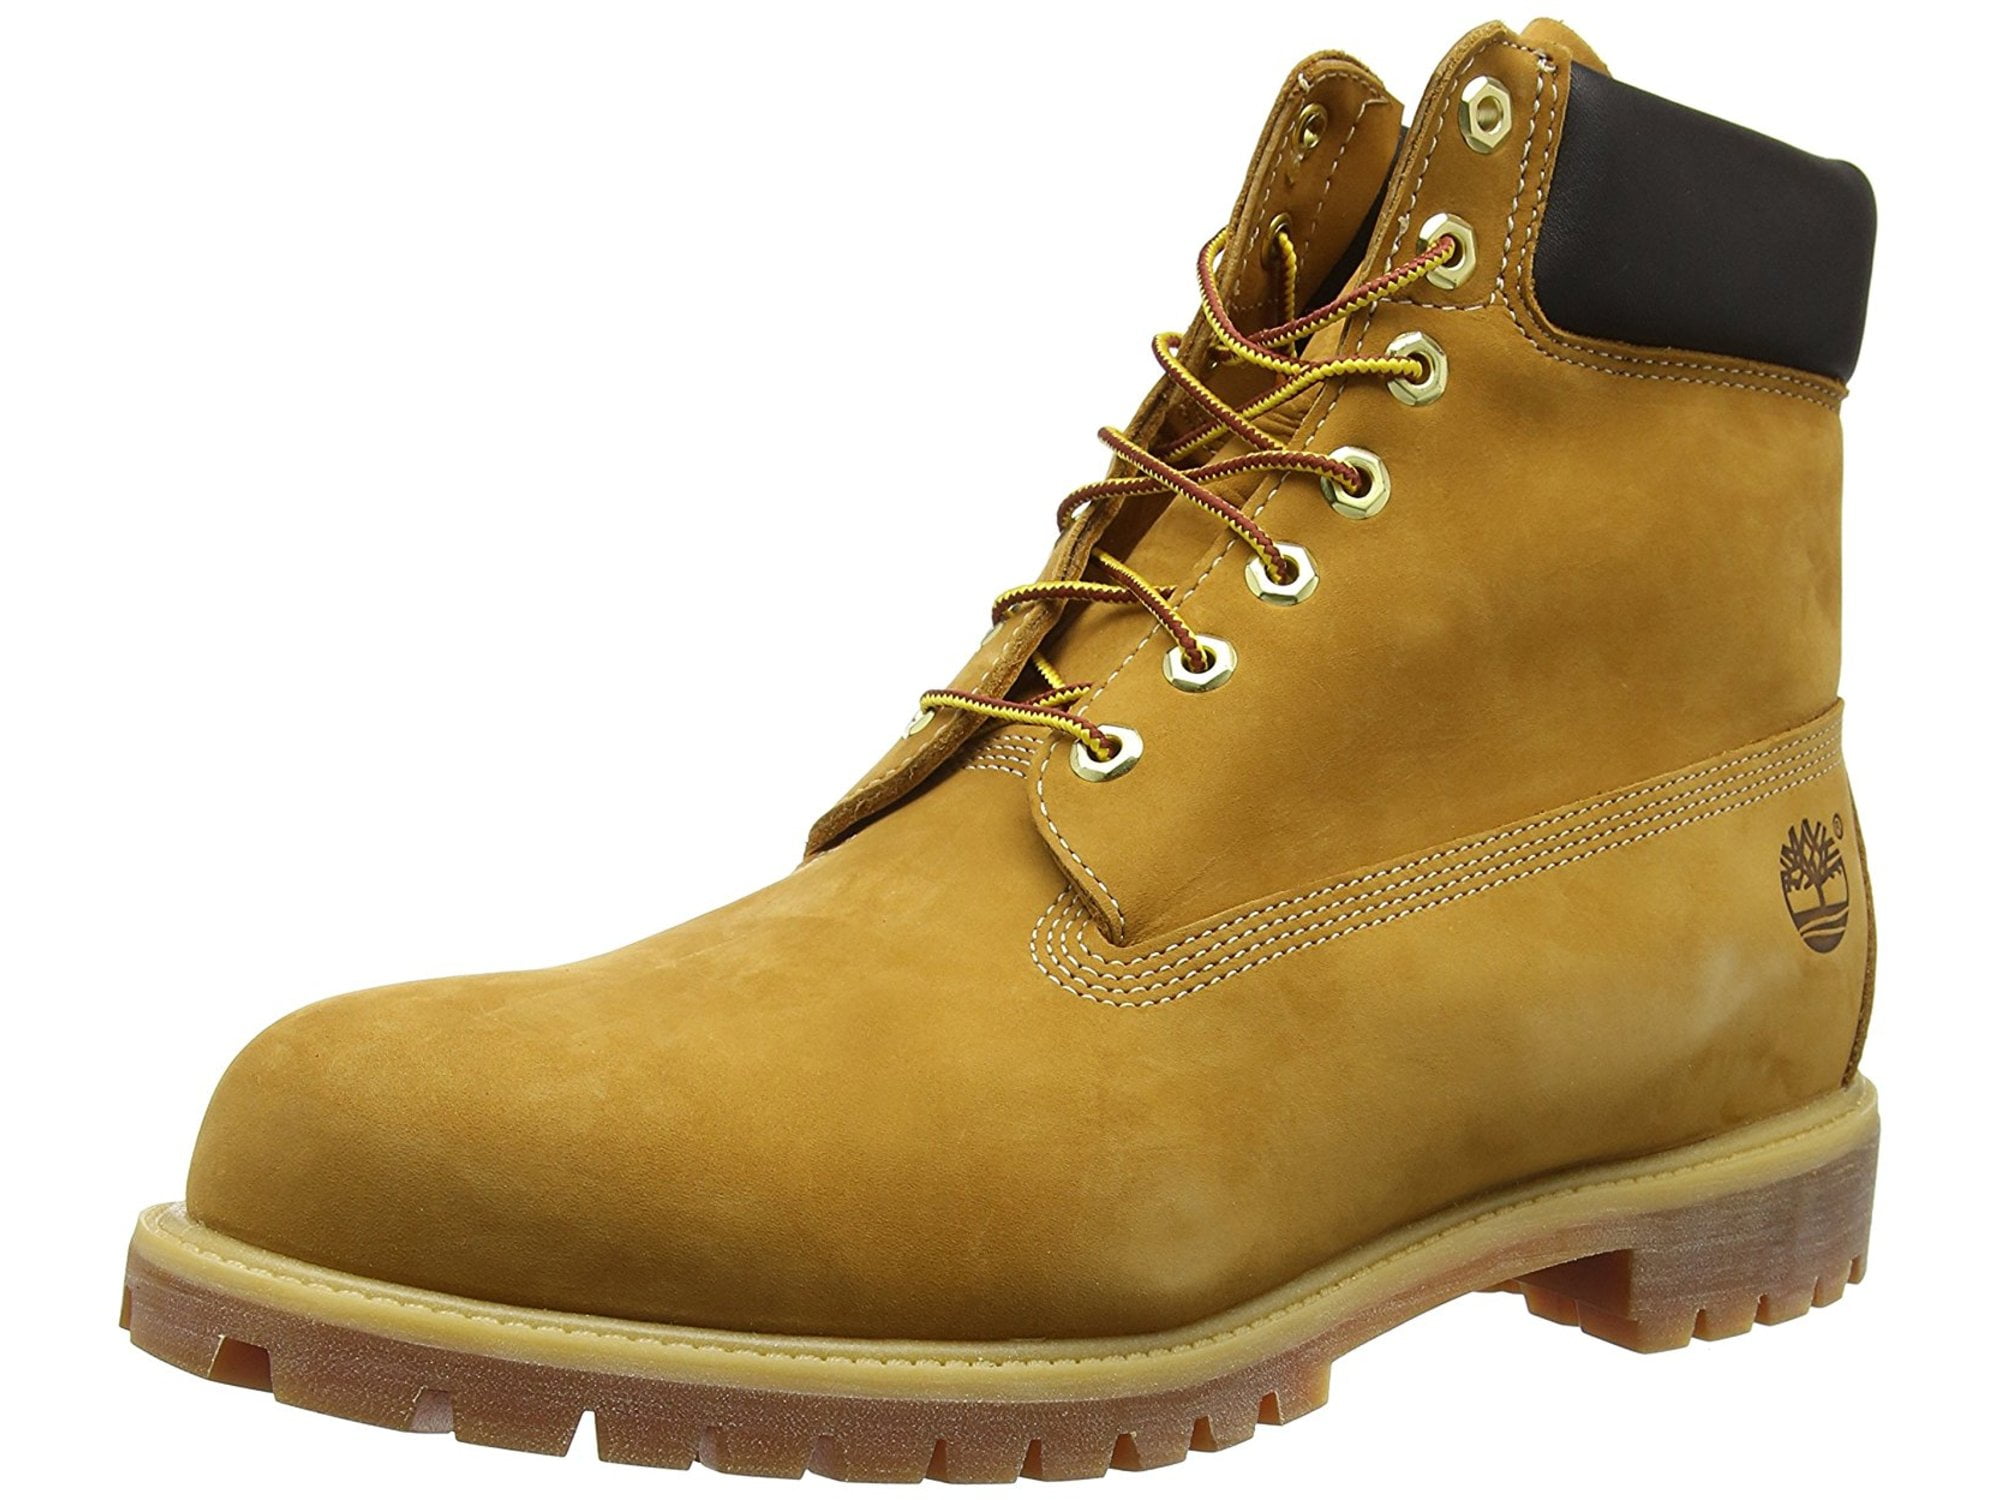 sell timberland boots